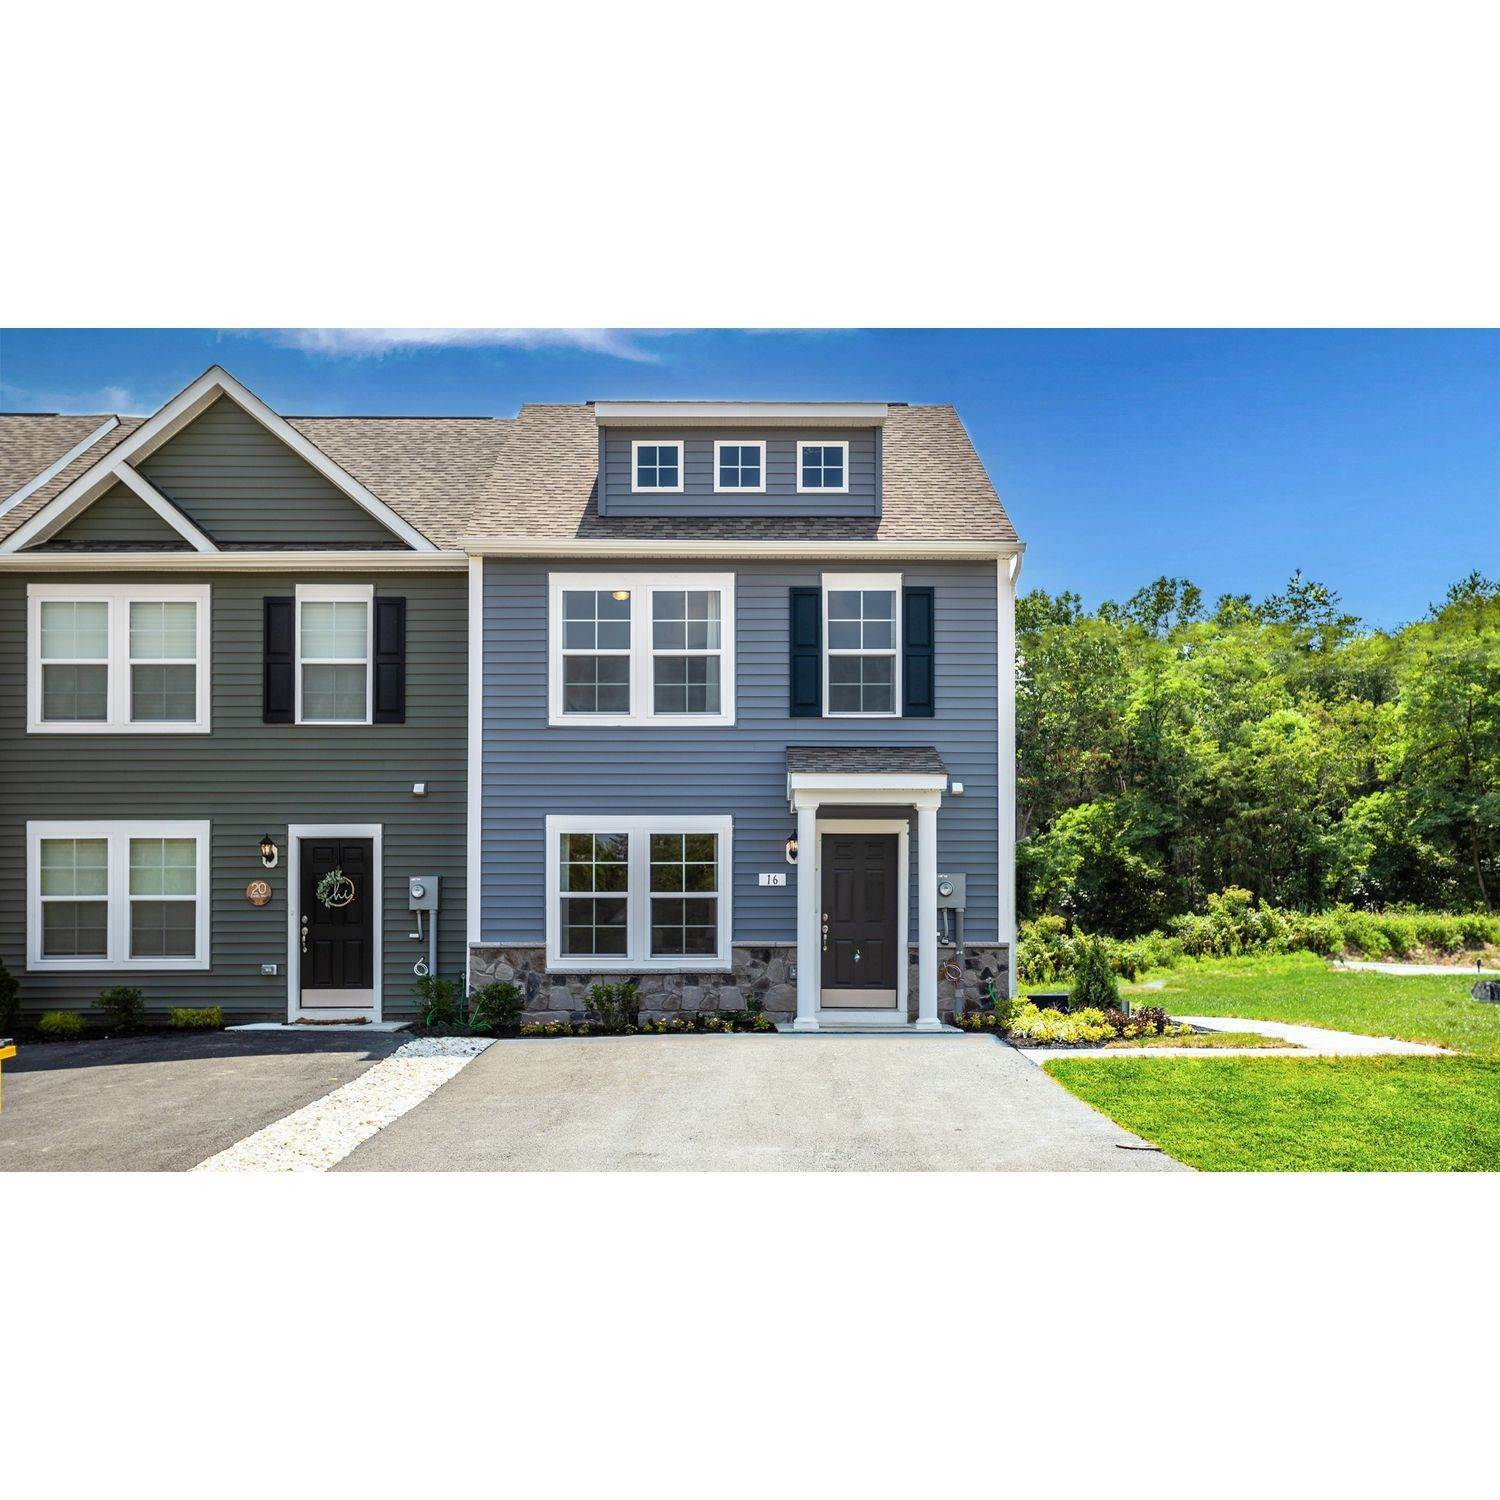 2. Whispering Pines Townhomes bâtiment à 16 Loblolly Drive, Bunker Hill, WV 25413